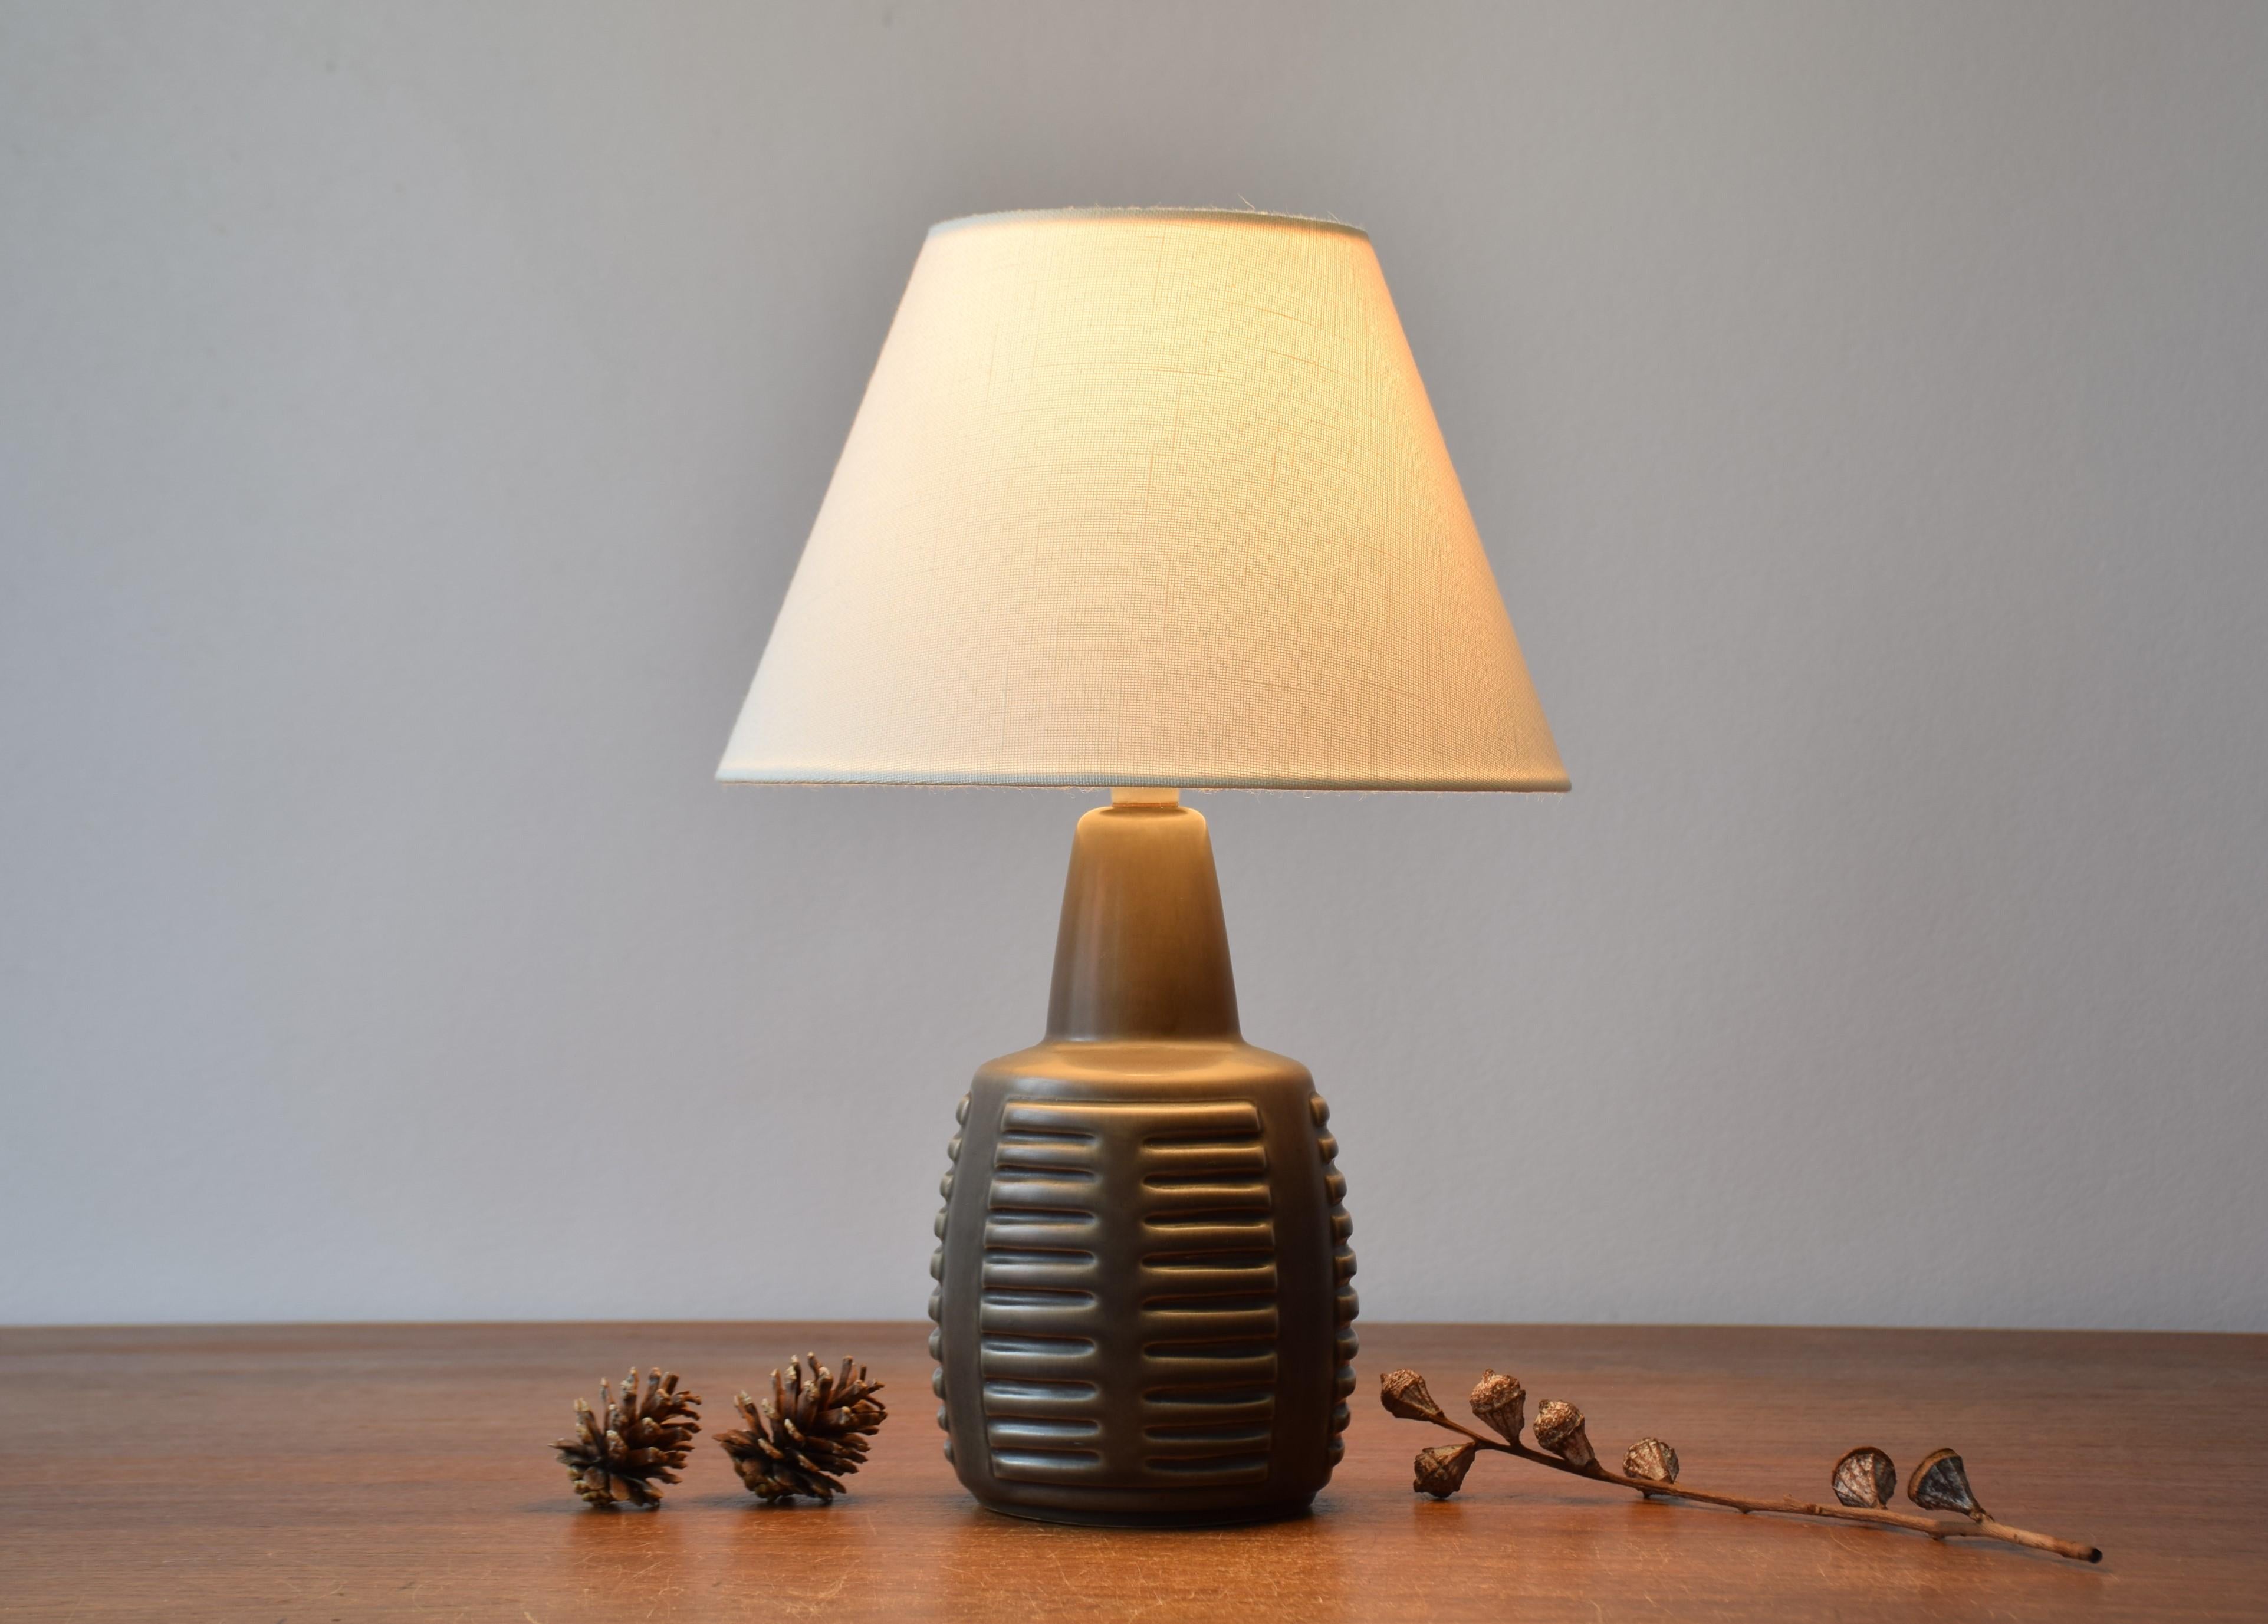 Small ceramic table lamp by Einar Johansen for Søholm Stentøj, Denmark, made circa 1960s. Perfect as bedside lamp.

The lamp has dusted brown glaze.

Included are new clip on bulb lamp shade designed and made in Denmark. They are made of woven